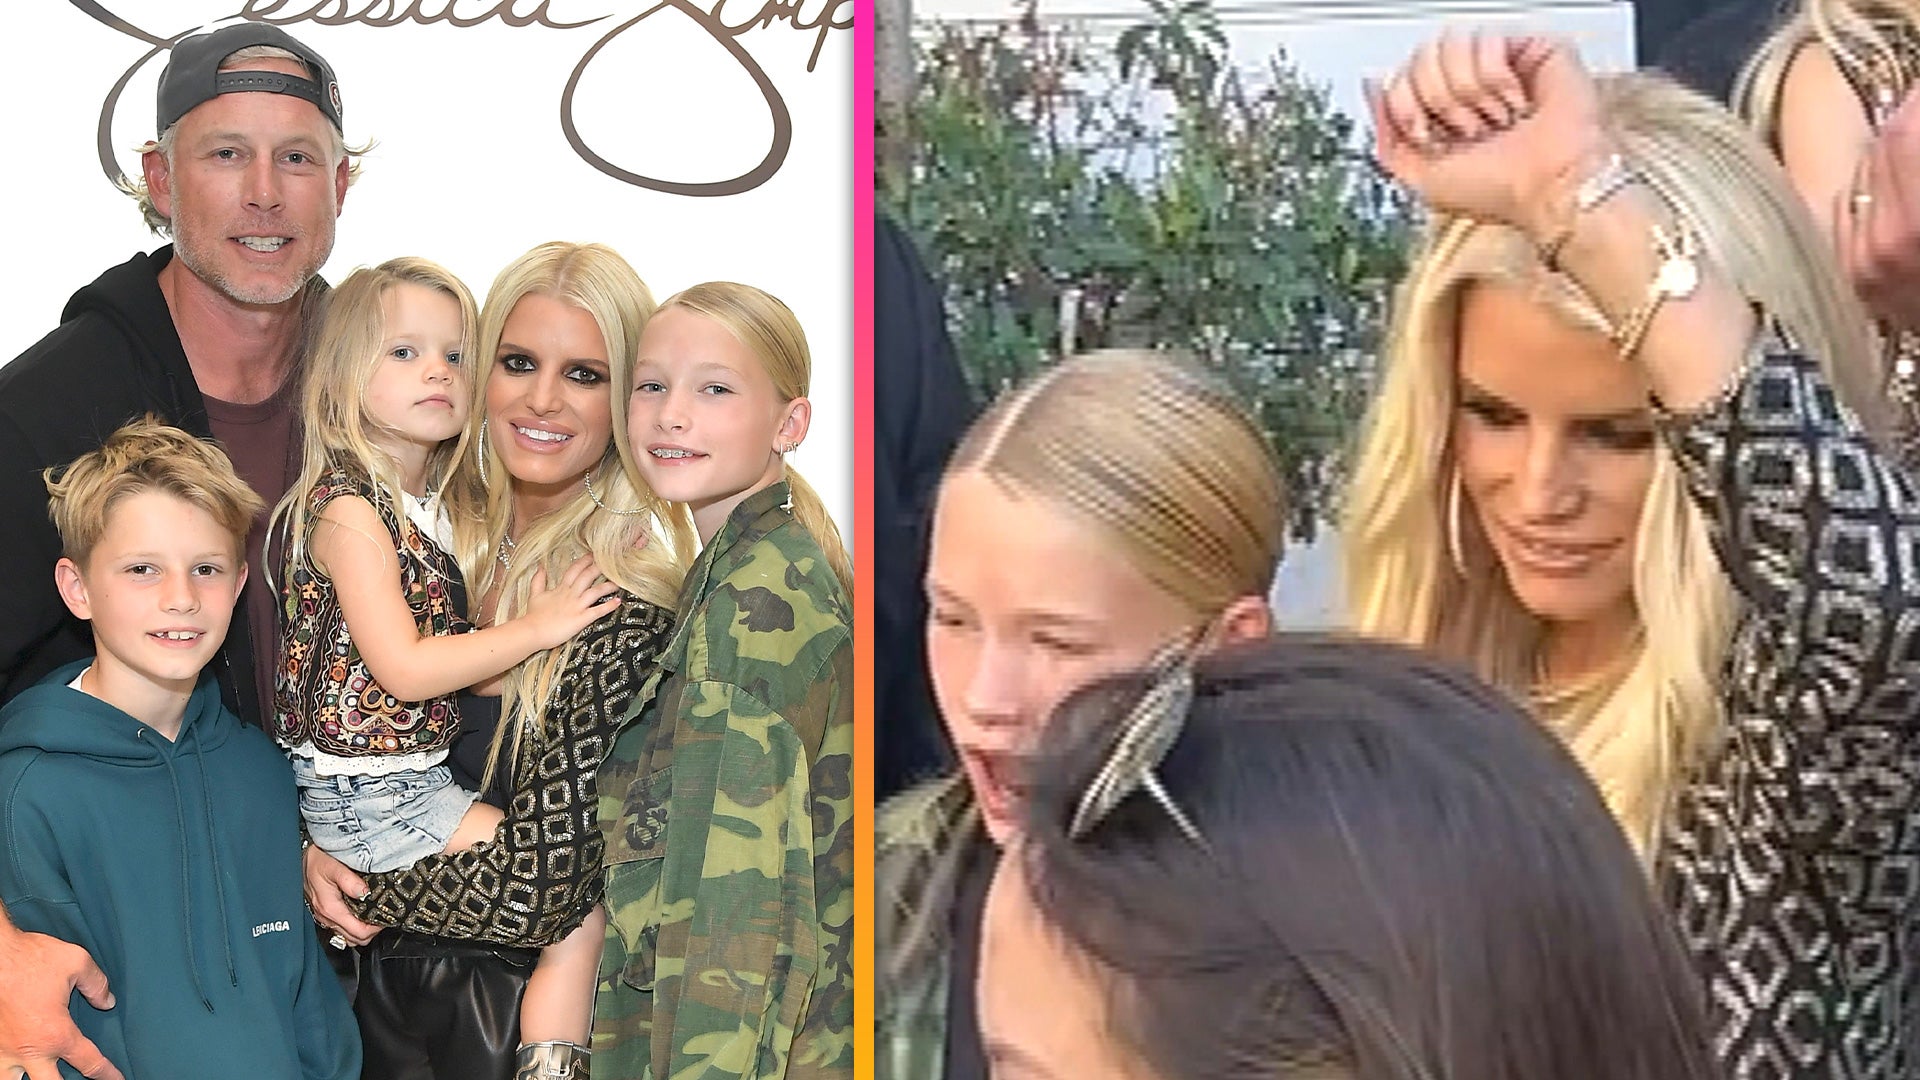 Jessica Simpson's Daughter Maxwell Sings and Dances Along to Her 2006 Hit  'A Public Affair